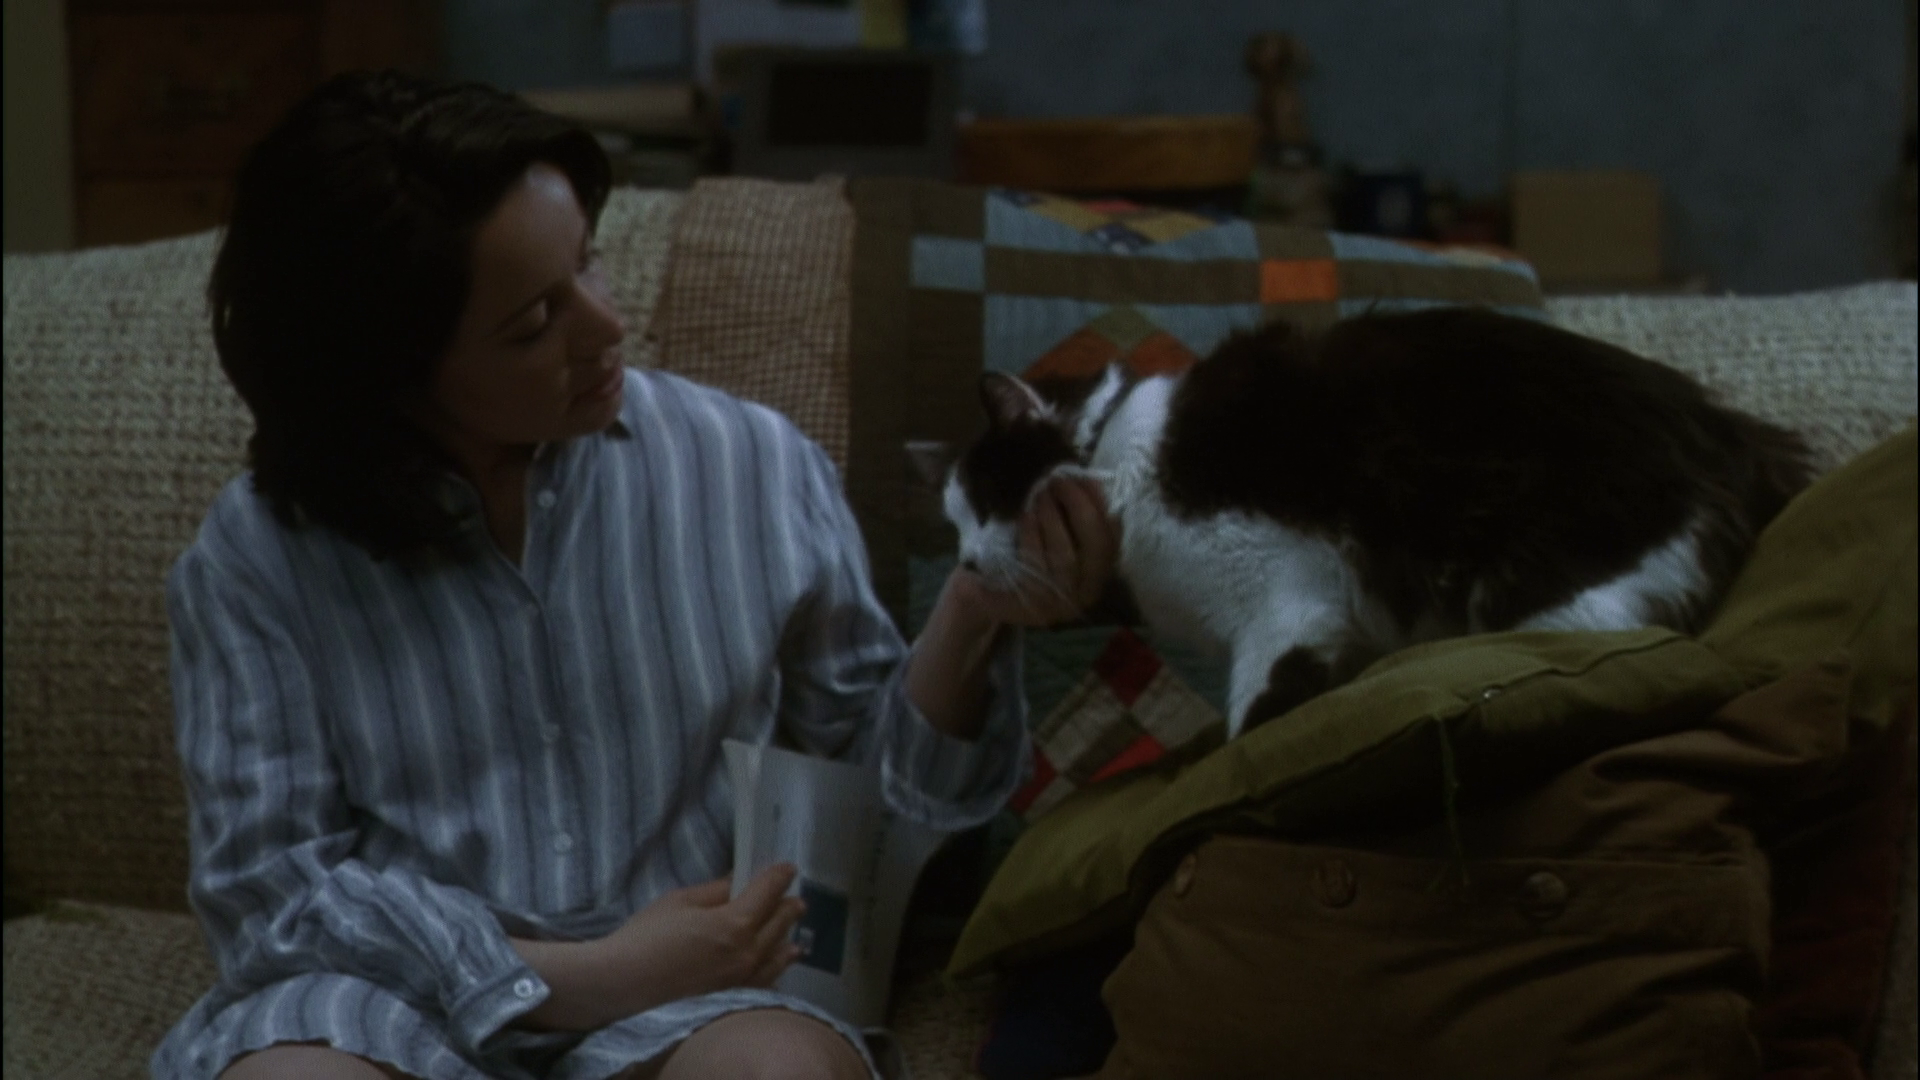 ߵӦ/Ѱ· The.Truth.About.Cats.and.Dogs.1996.1080p.BluRay.x264-PSYCHD 6.56GB-2.png